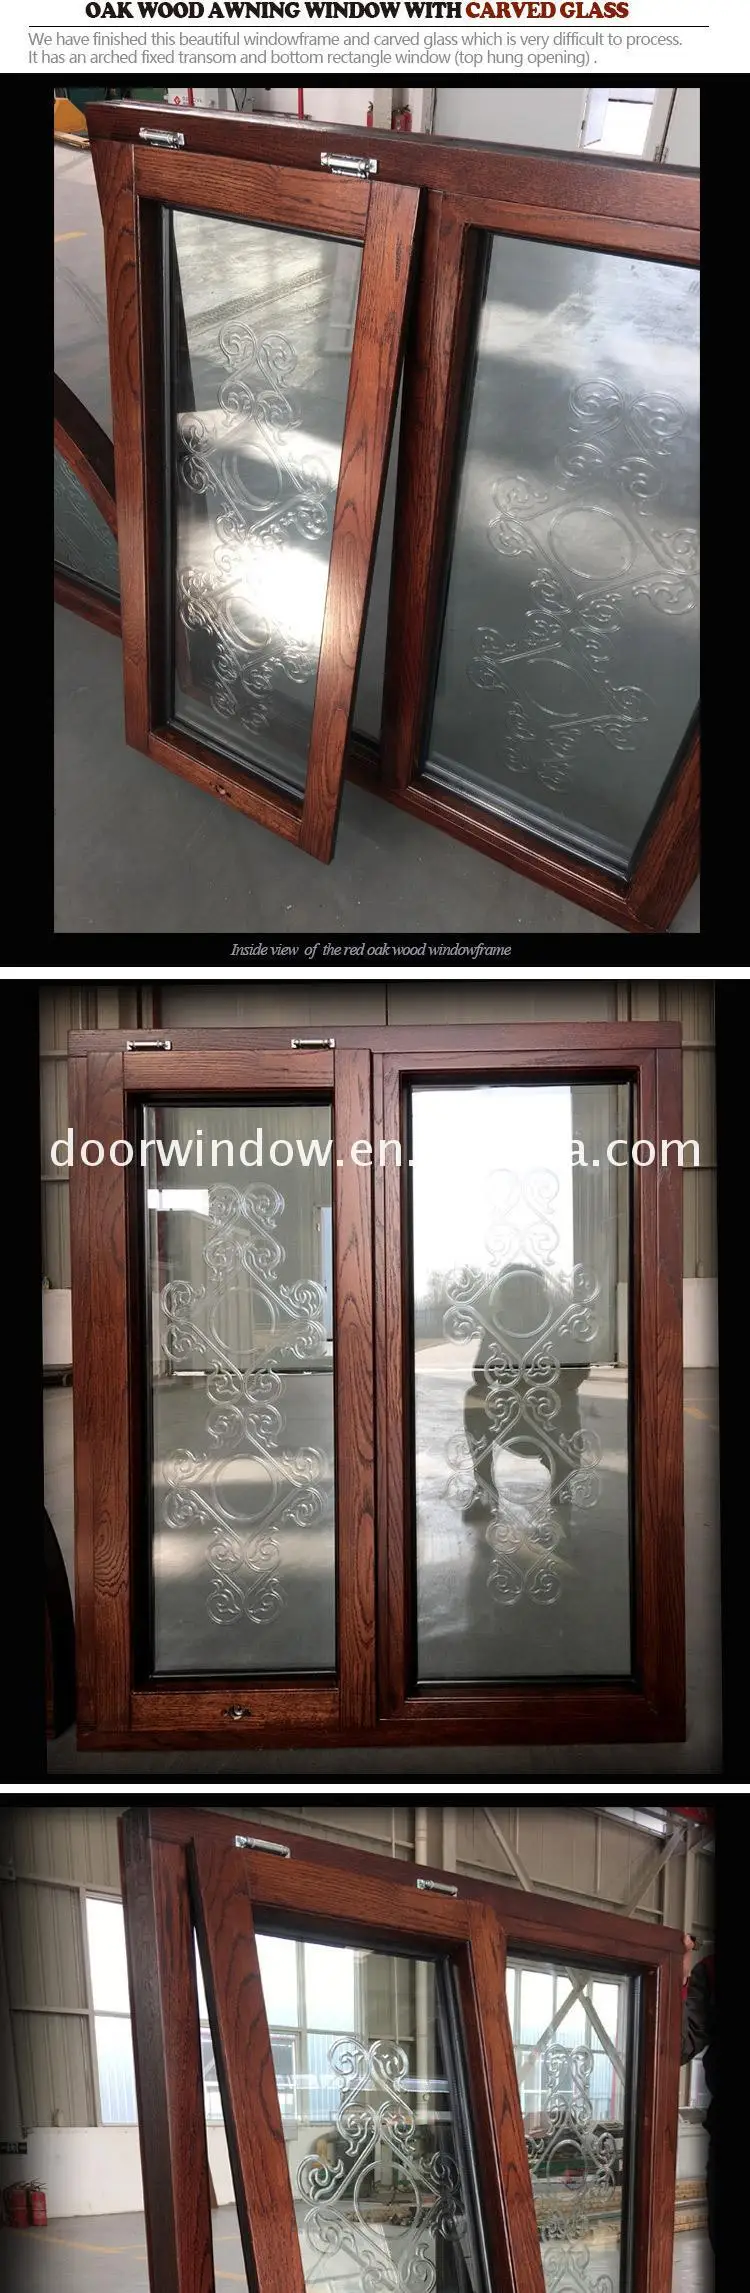 AS2047 Certified Round window photos of grills for windows old wood sale